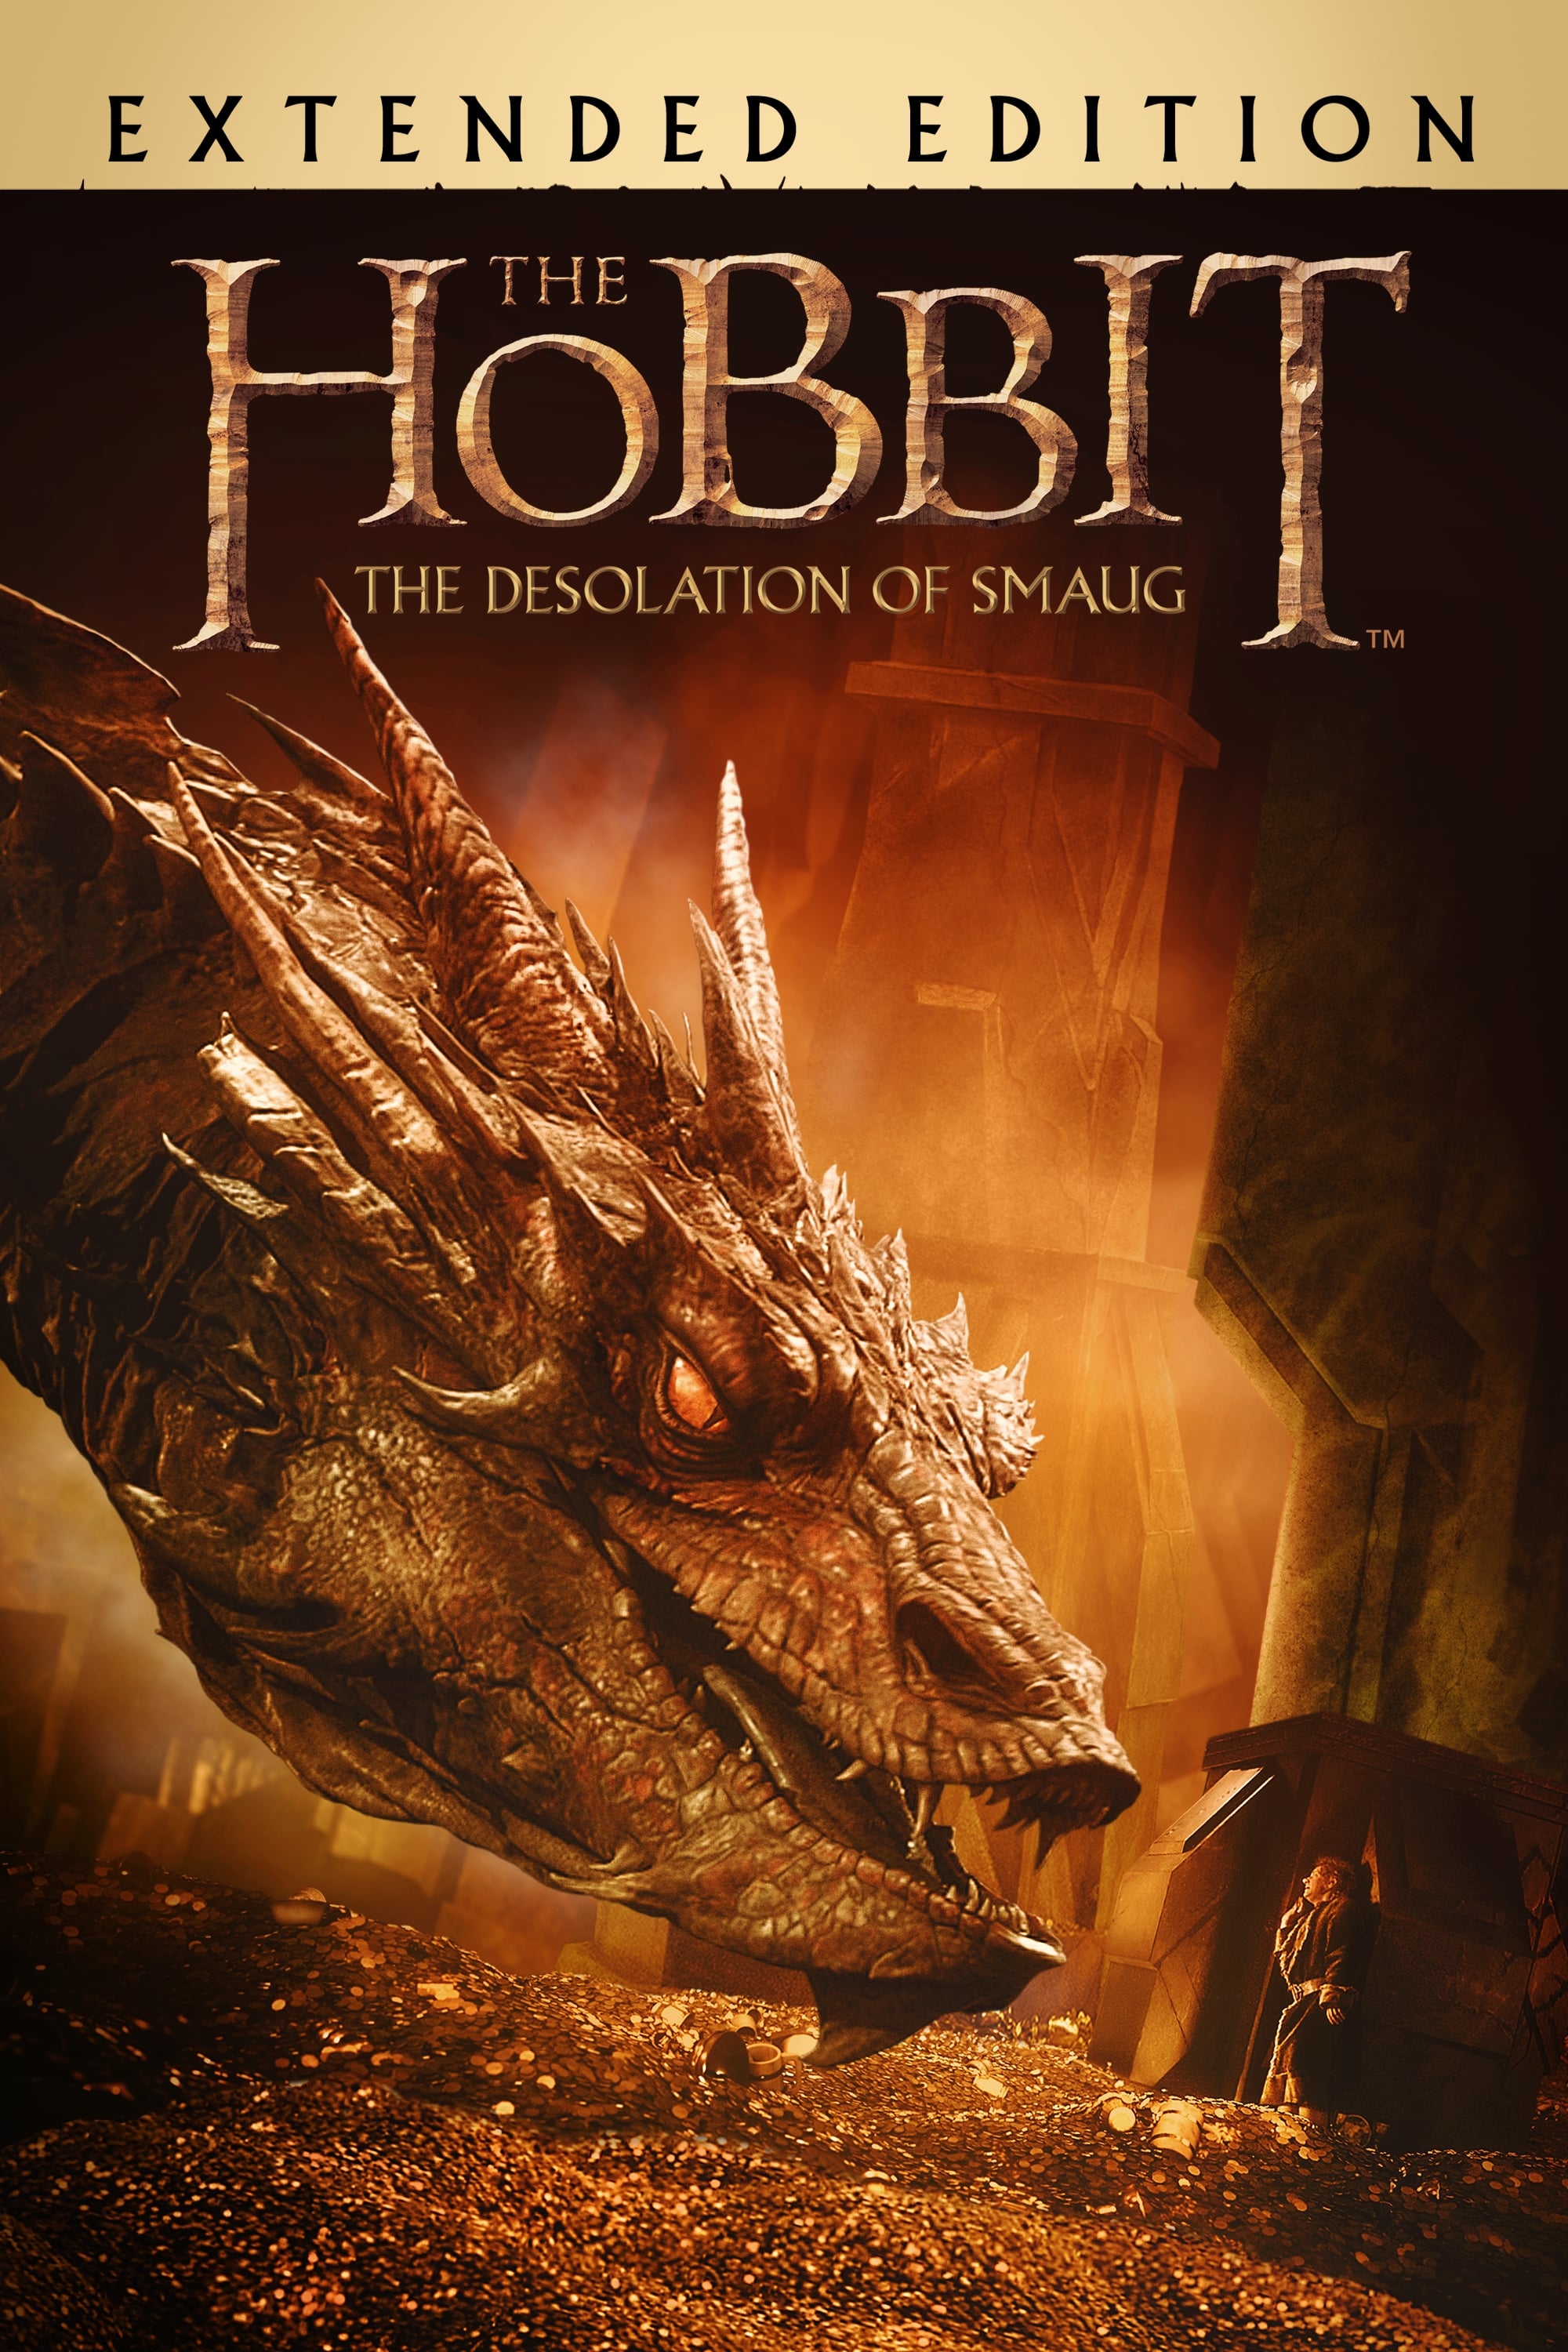 The Hobbit The Desolation of Smaug (2013) [EXTENDED] Full HD 1080p Latino – CMHDD